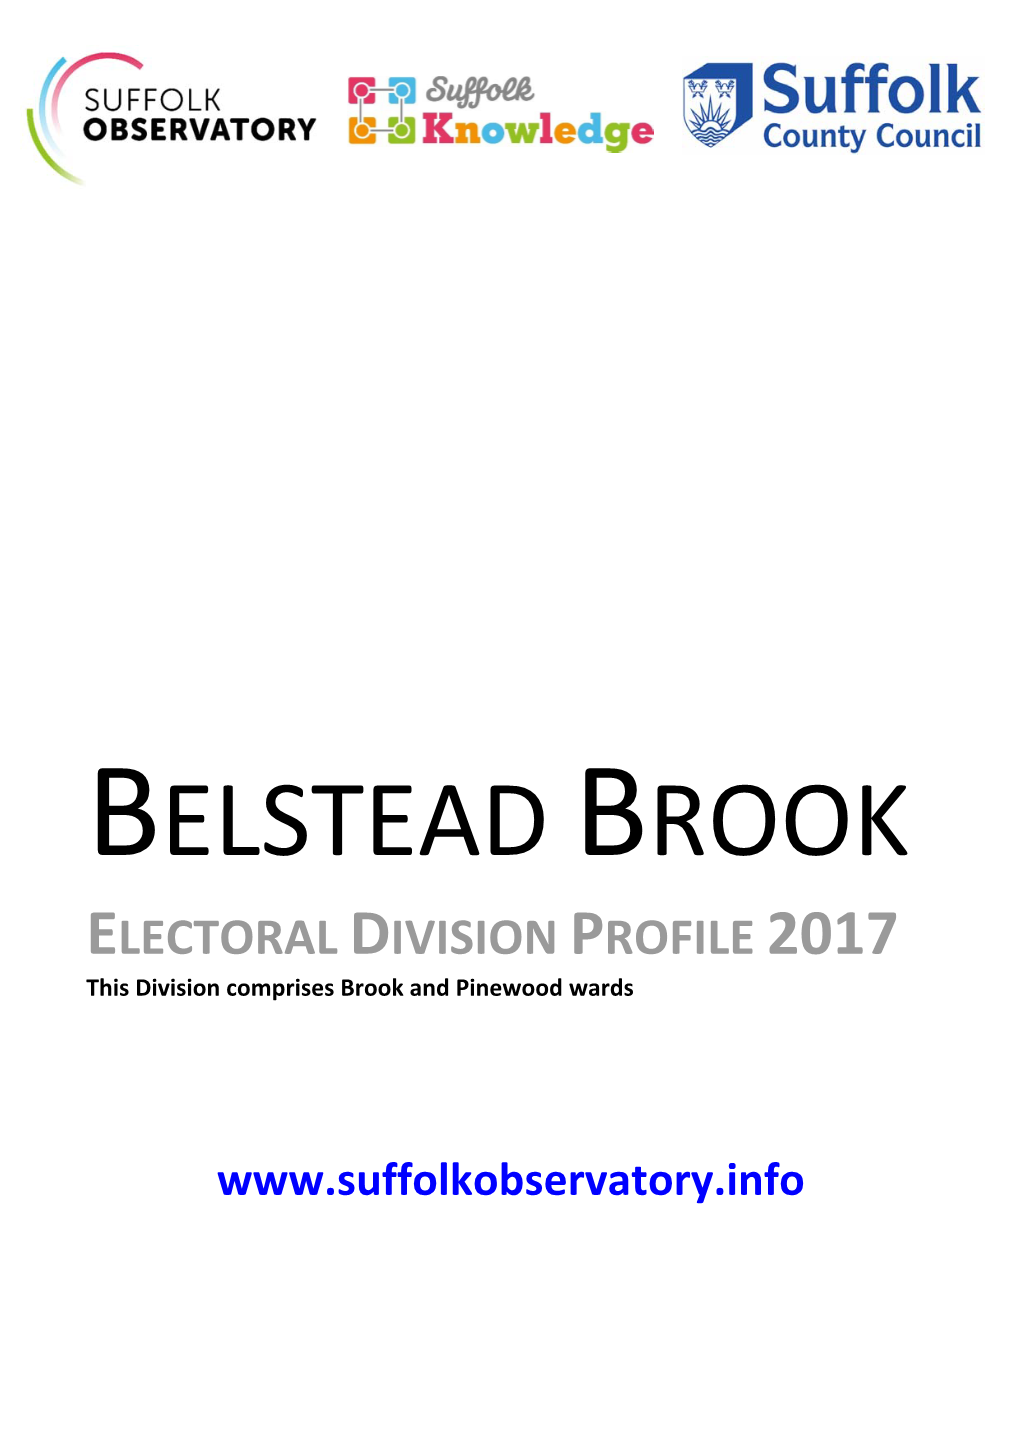 BELSTEAD BROOK ELECTORAL DIVISION PROFILE 2017 This Division Comprises Brook and Pinewood Wards